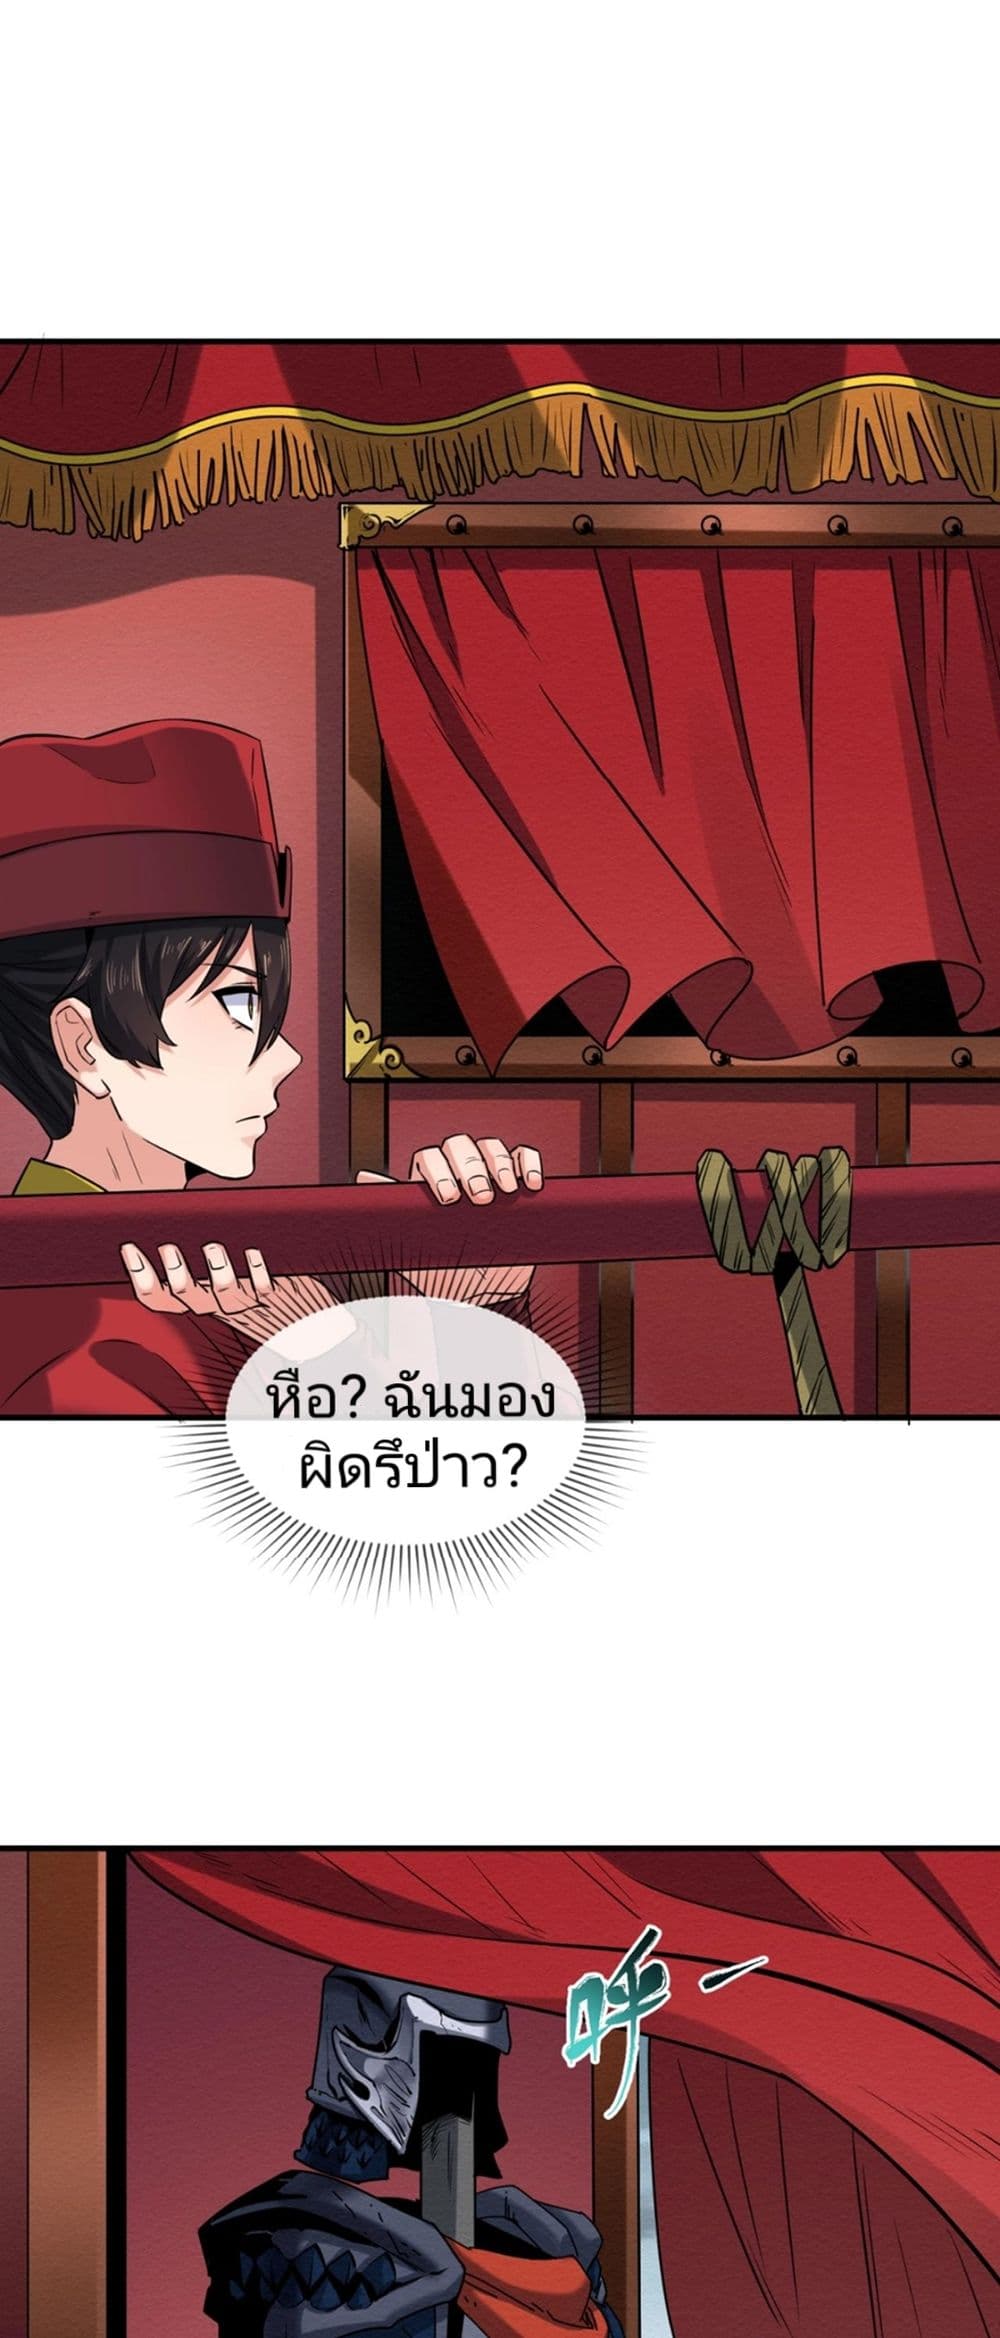 The Age of Ghost Spirits à¸à¸­à¸à¸à¸µà¹ 14 (42)